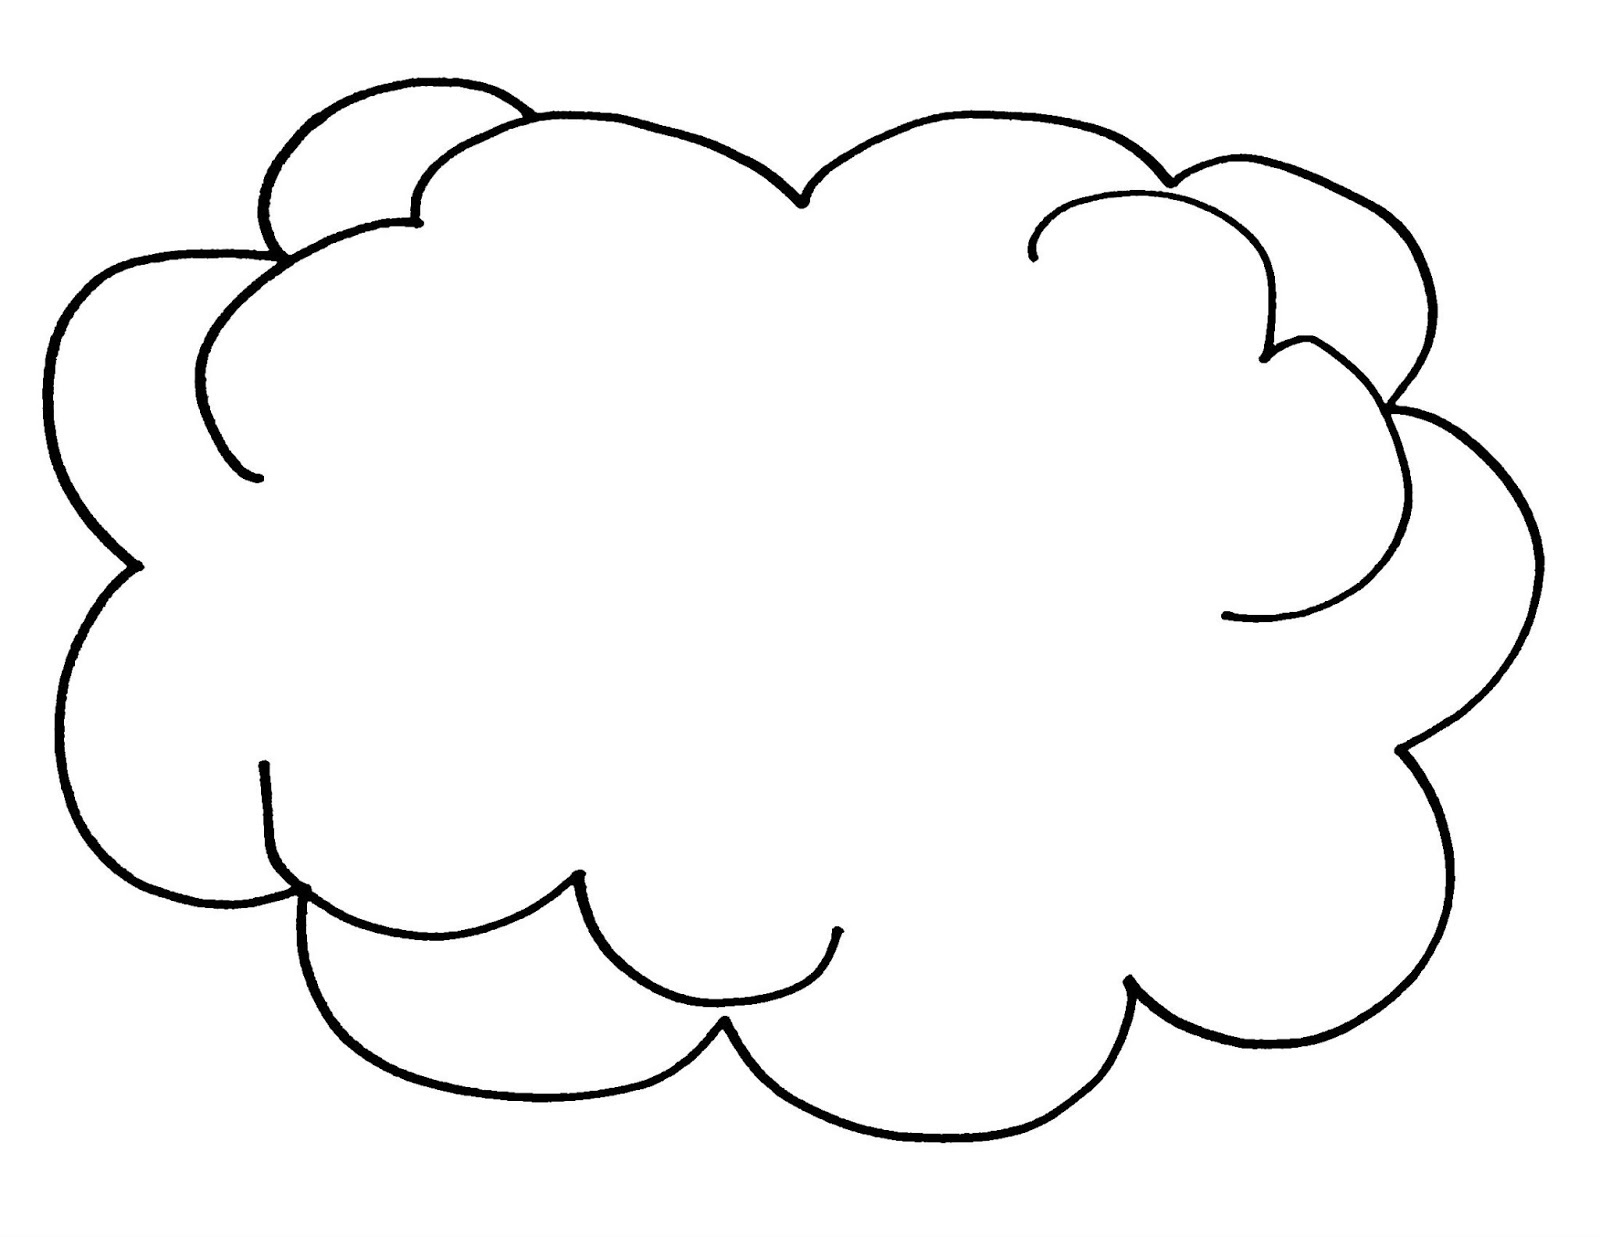 Free Cloud Template, Download Free Cloud Template png images, Free